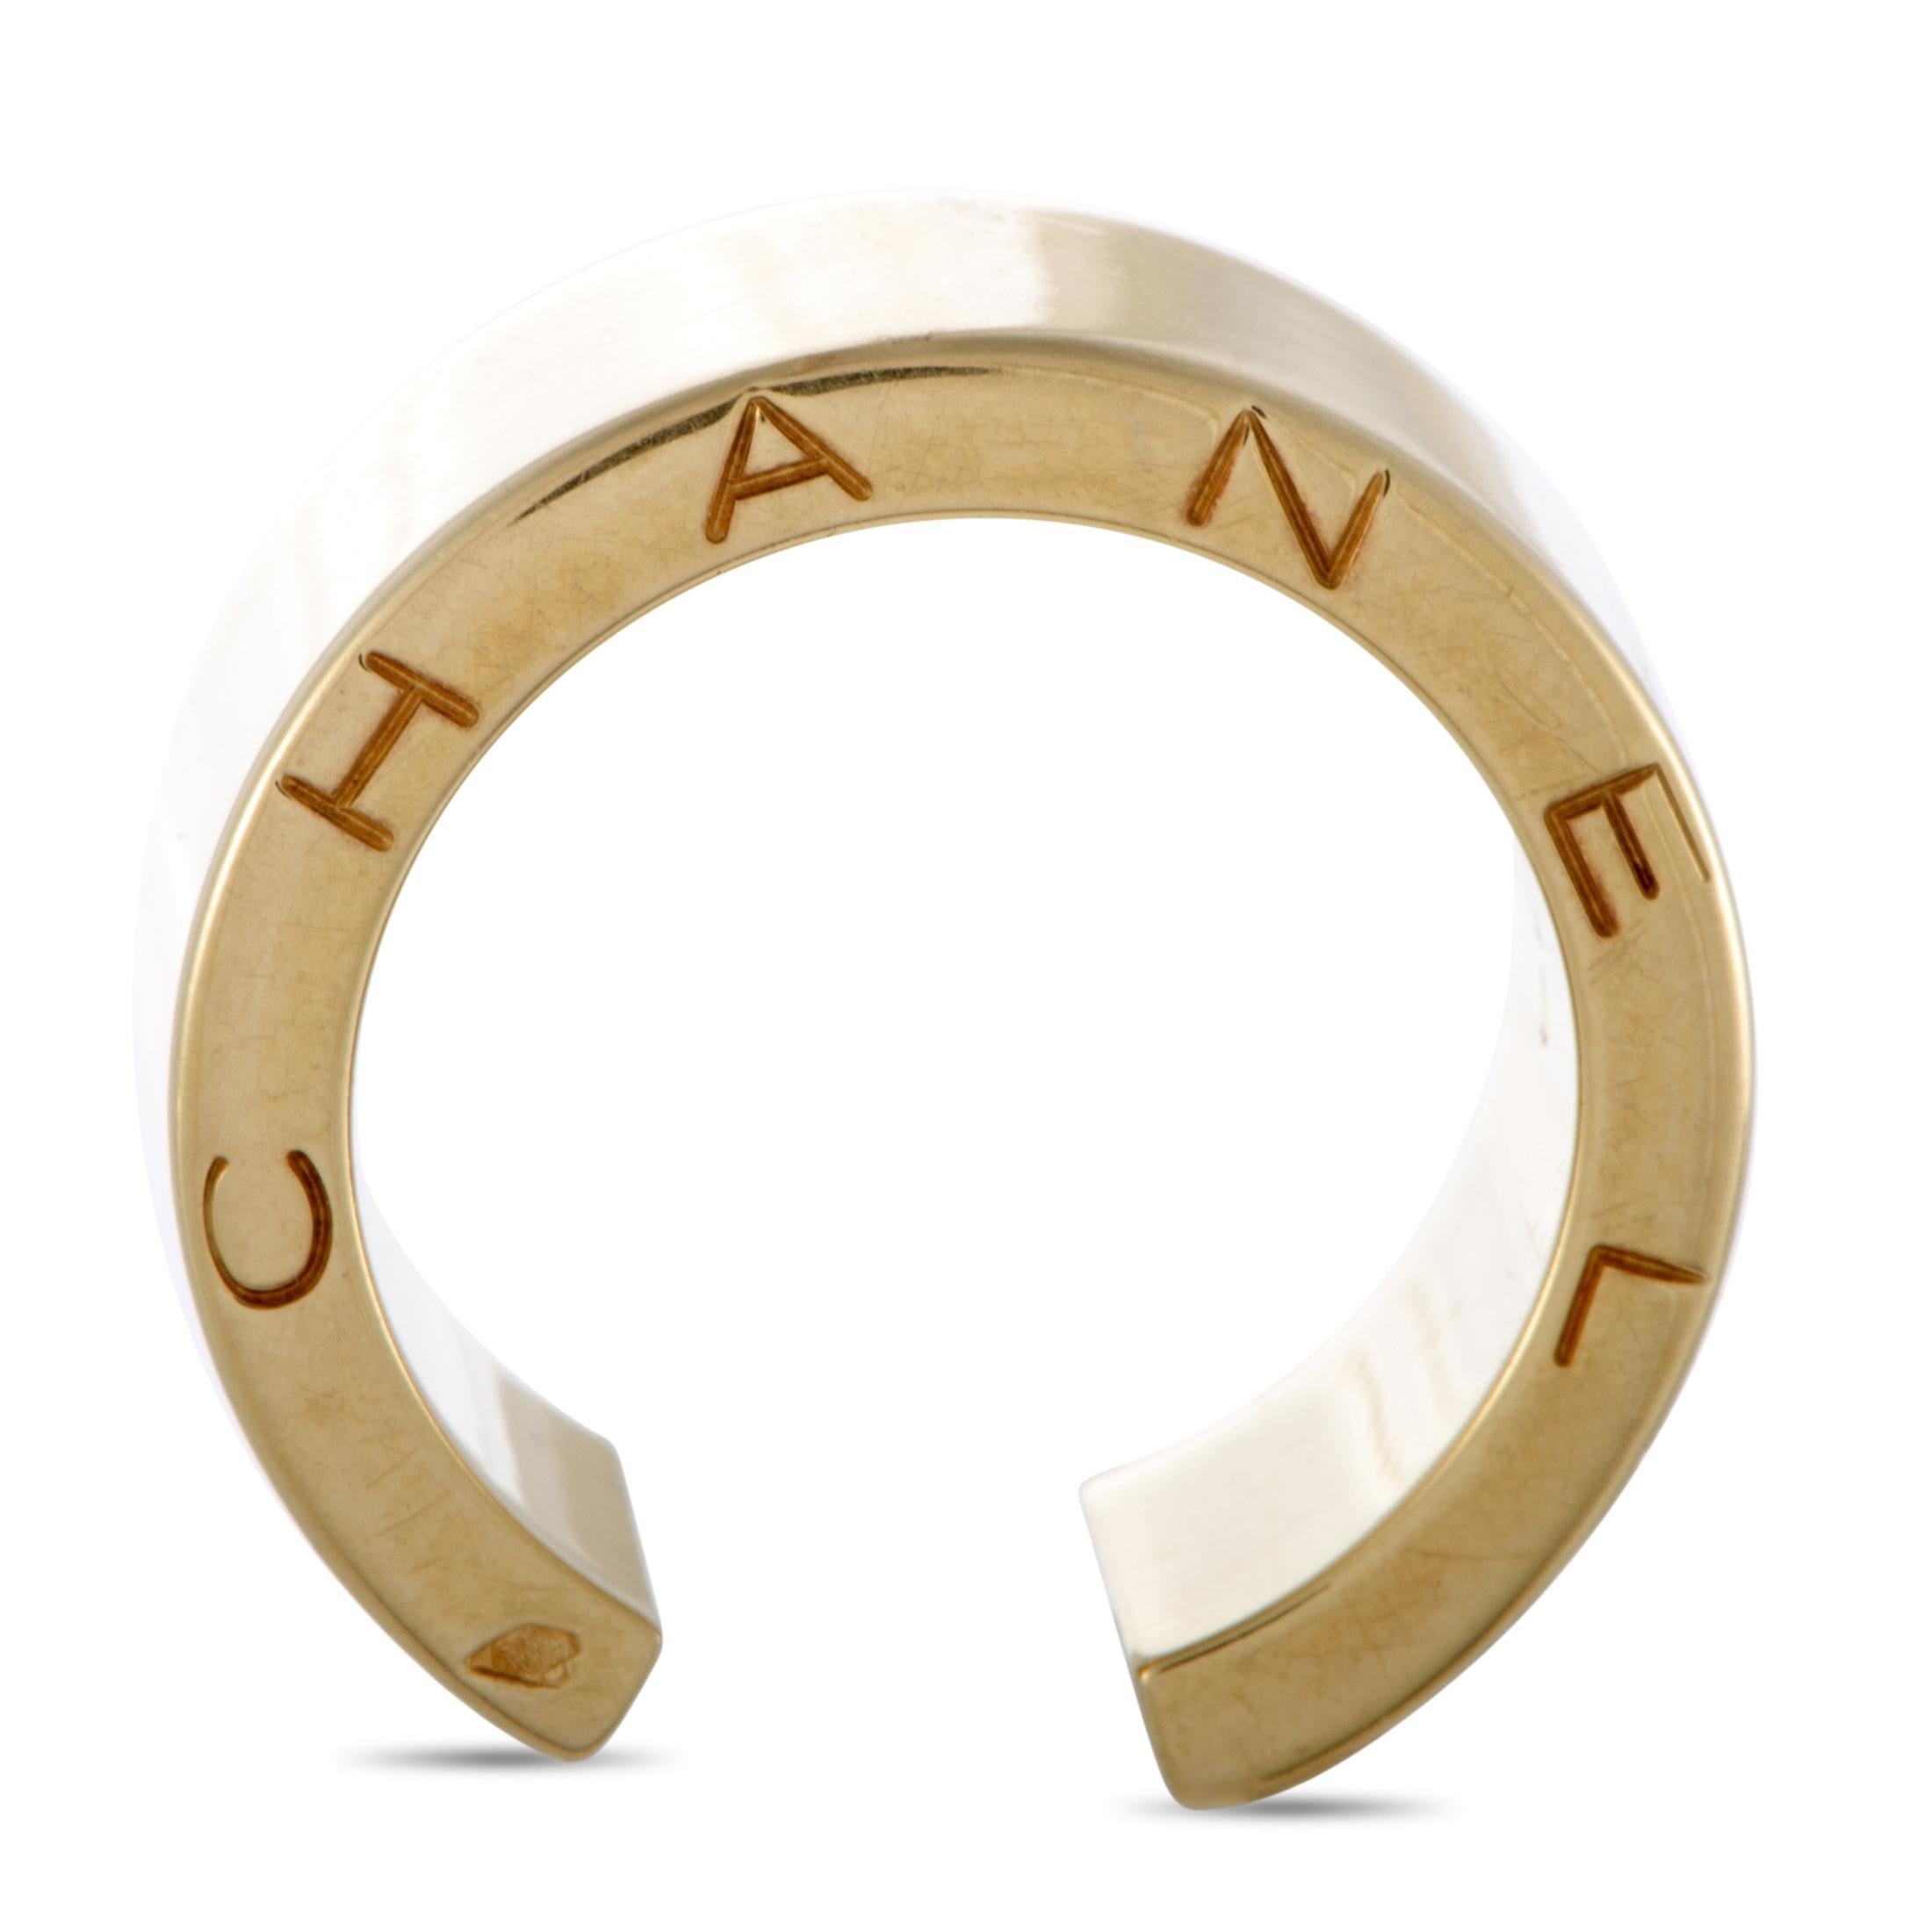 A vision of sublime elegance, this exquisite piece presented by Chanel boasts an endearingly understated design and exceptional craftsmanship quality. The ring is made of classy 18K yellow gold and it weighs 15.1 grams.
